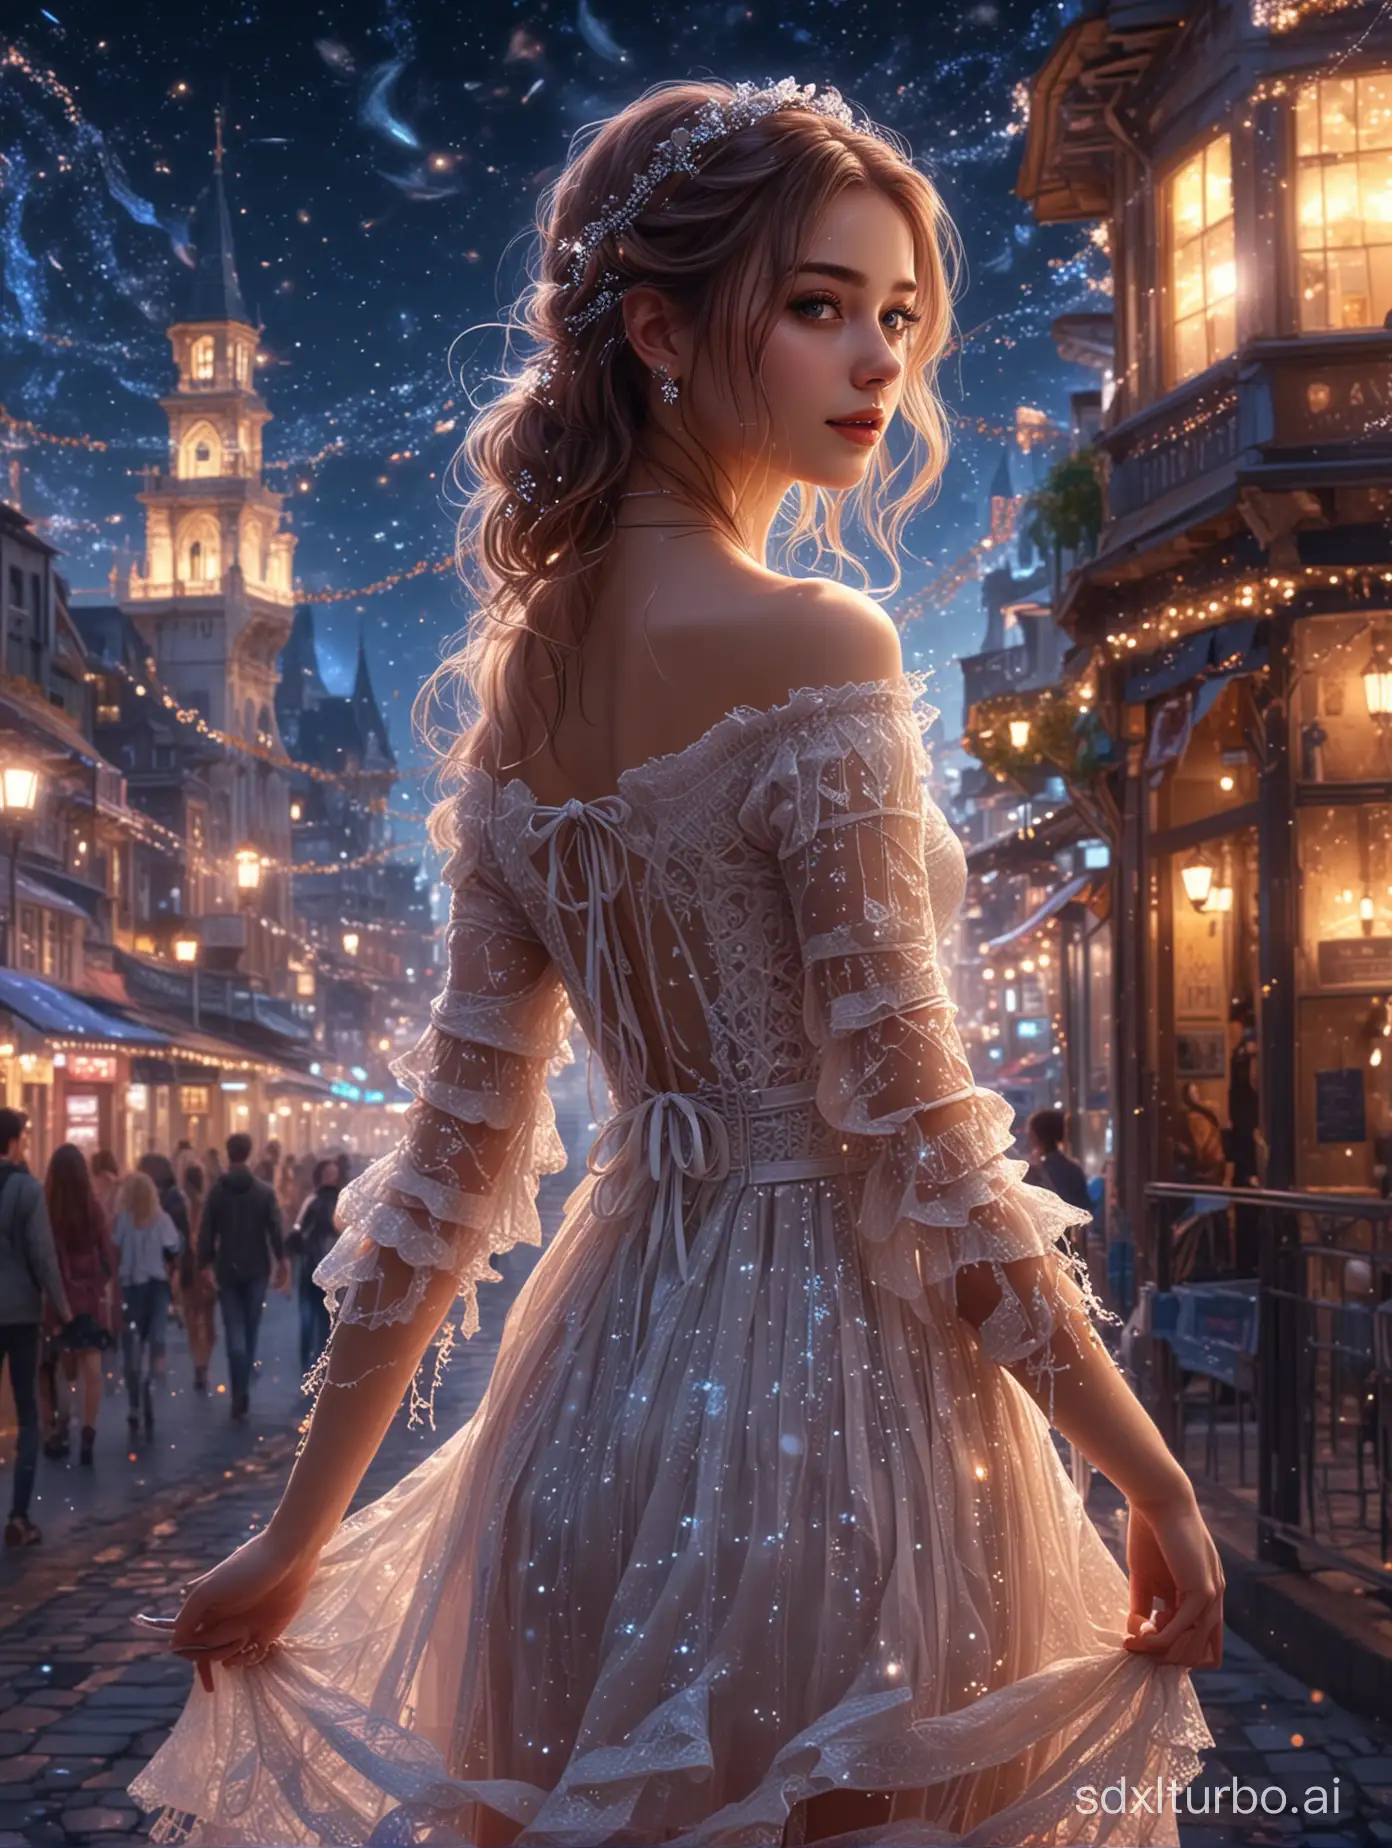 Full of stars and space city, precise drawing, glittering city, illumination, vivid, fantastic, fantasy, break, traveling 20 year old girl , pretty dress full of lace, ribbons and frills , break, sparkling and transparent, pretty, fantastic, fantasy, precise drawing, high quality, 4K, 8K, 16K